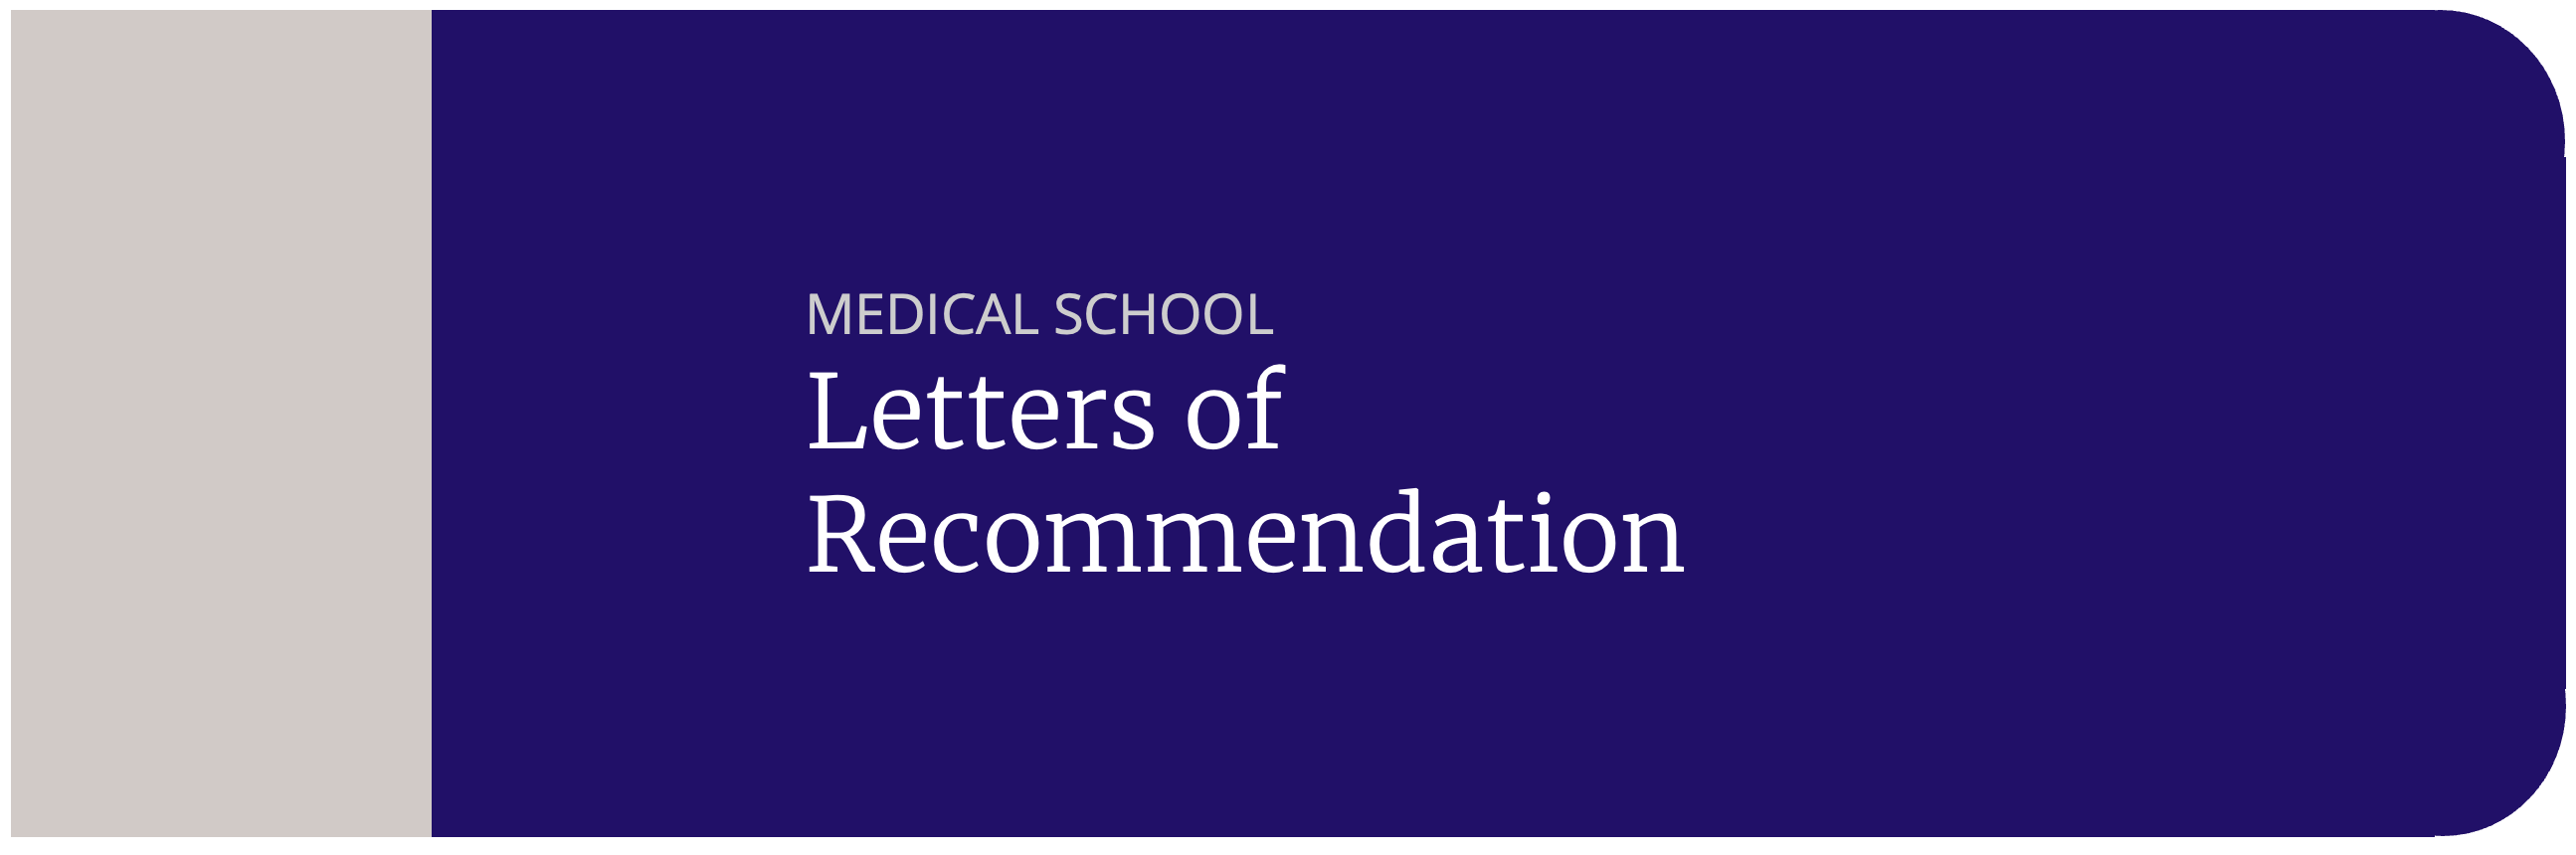 medical school who write letters recommendation